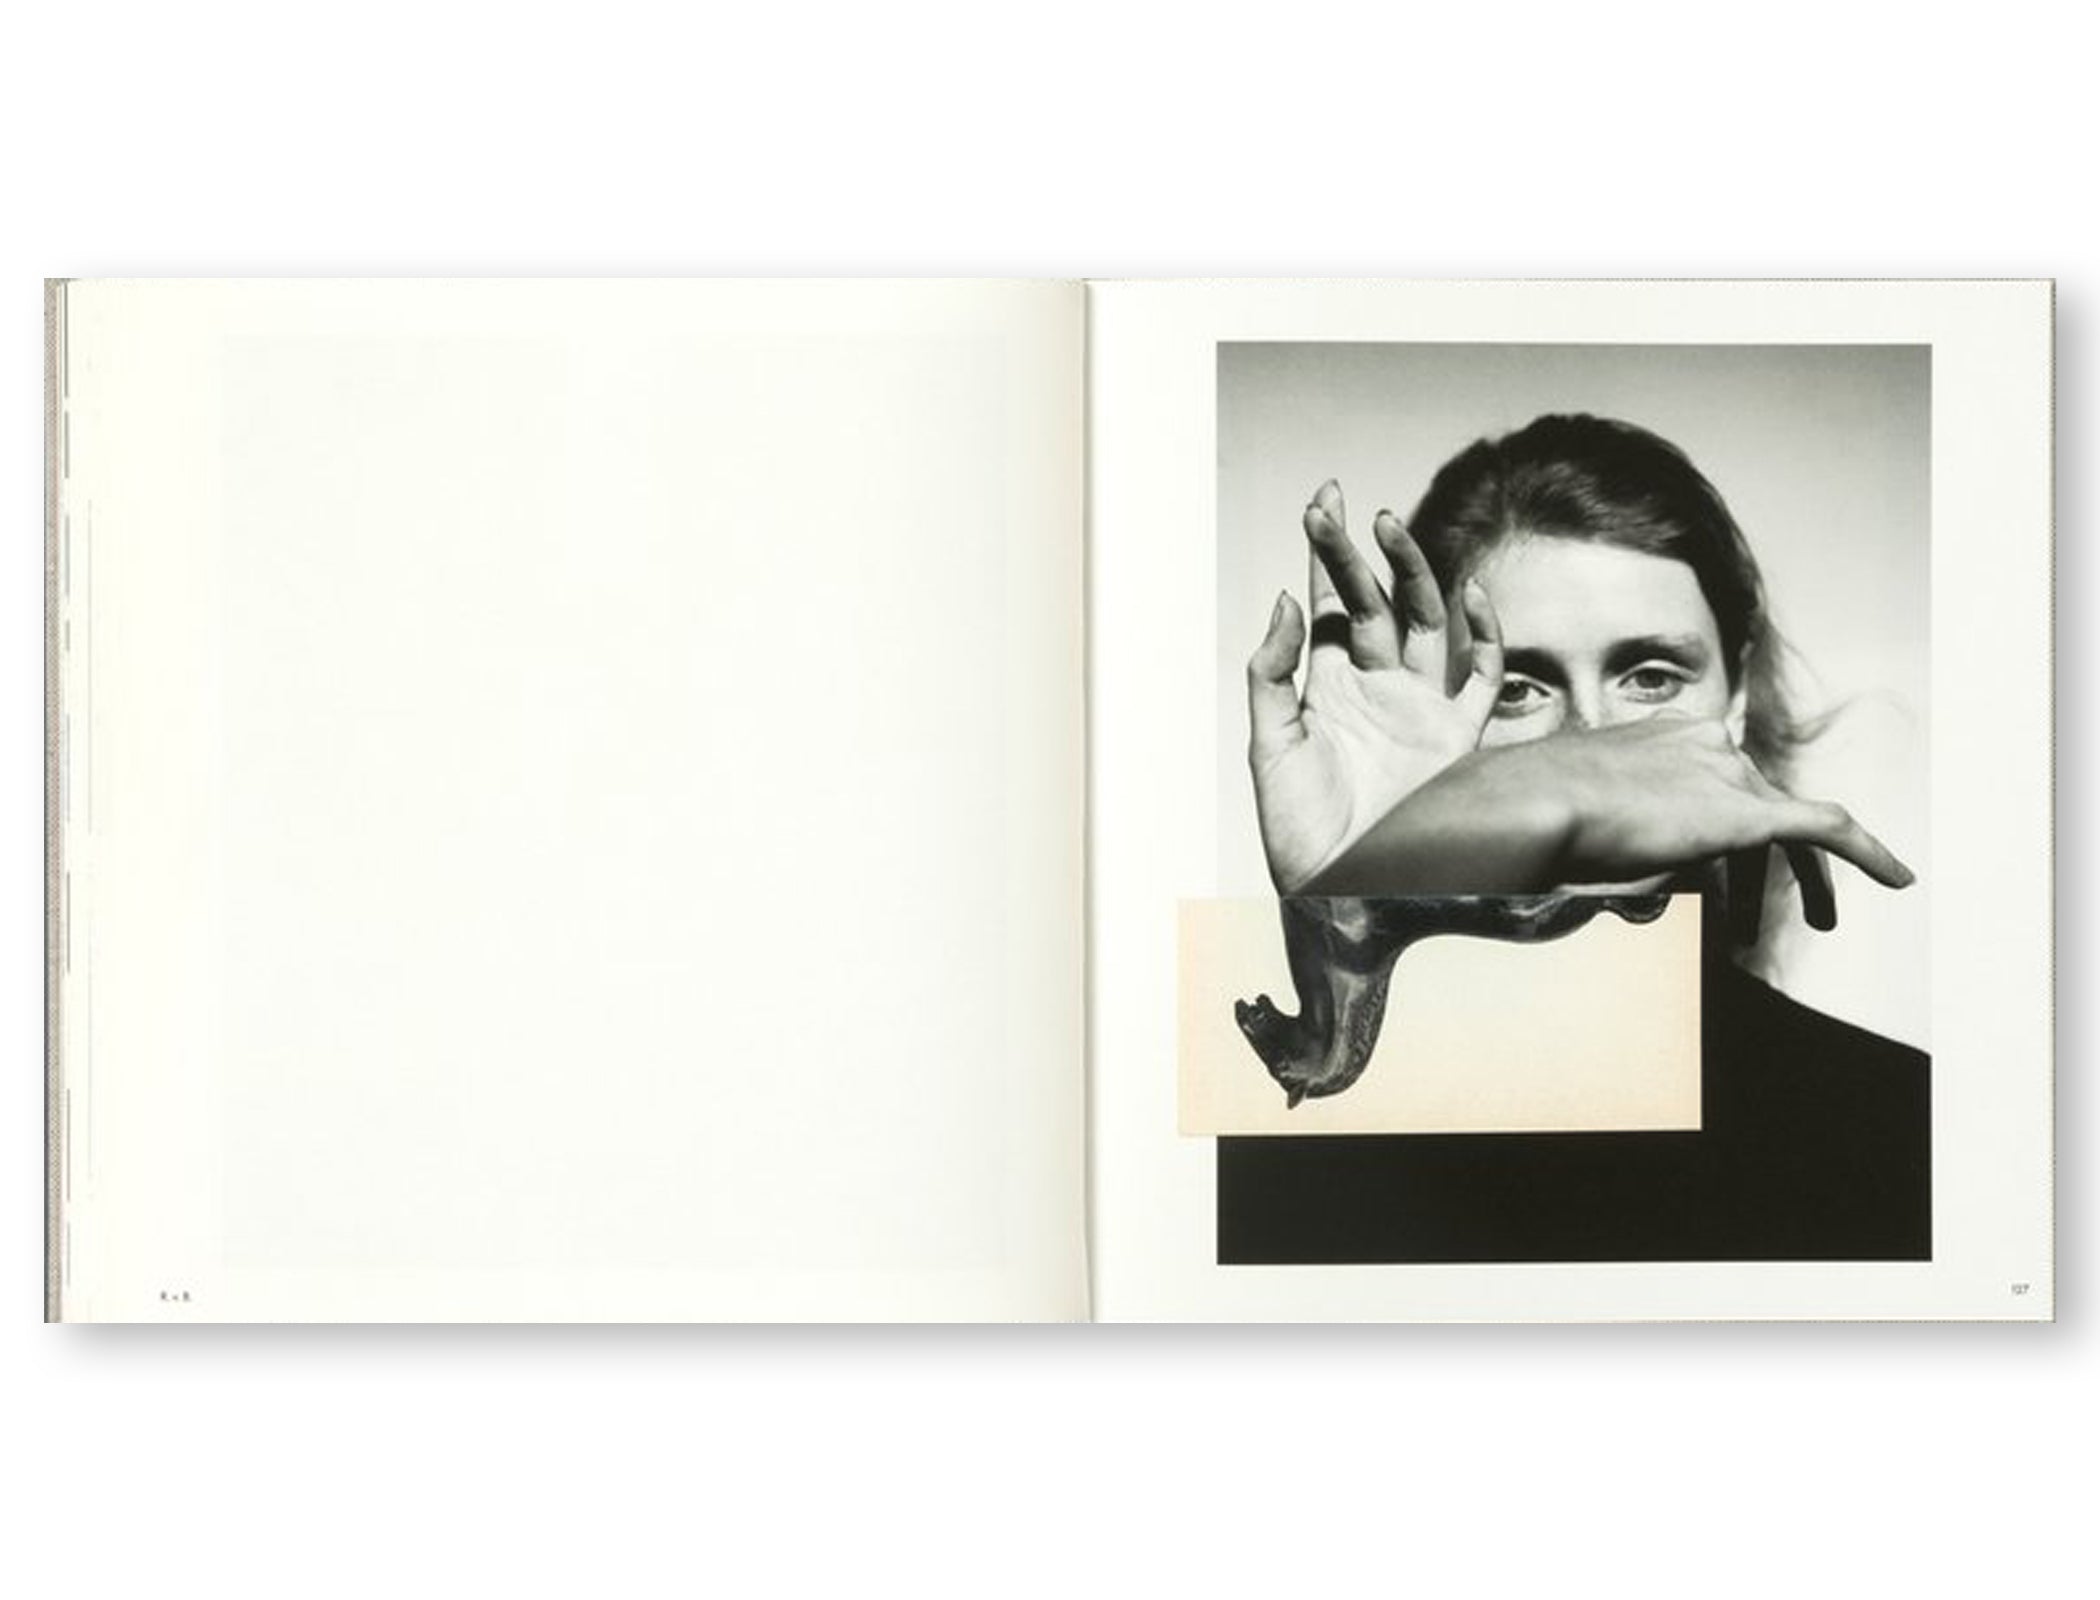 PHOTOGRAPHS by Jack Davison [ANNOTATED ARTISTS EDITION]